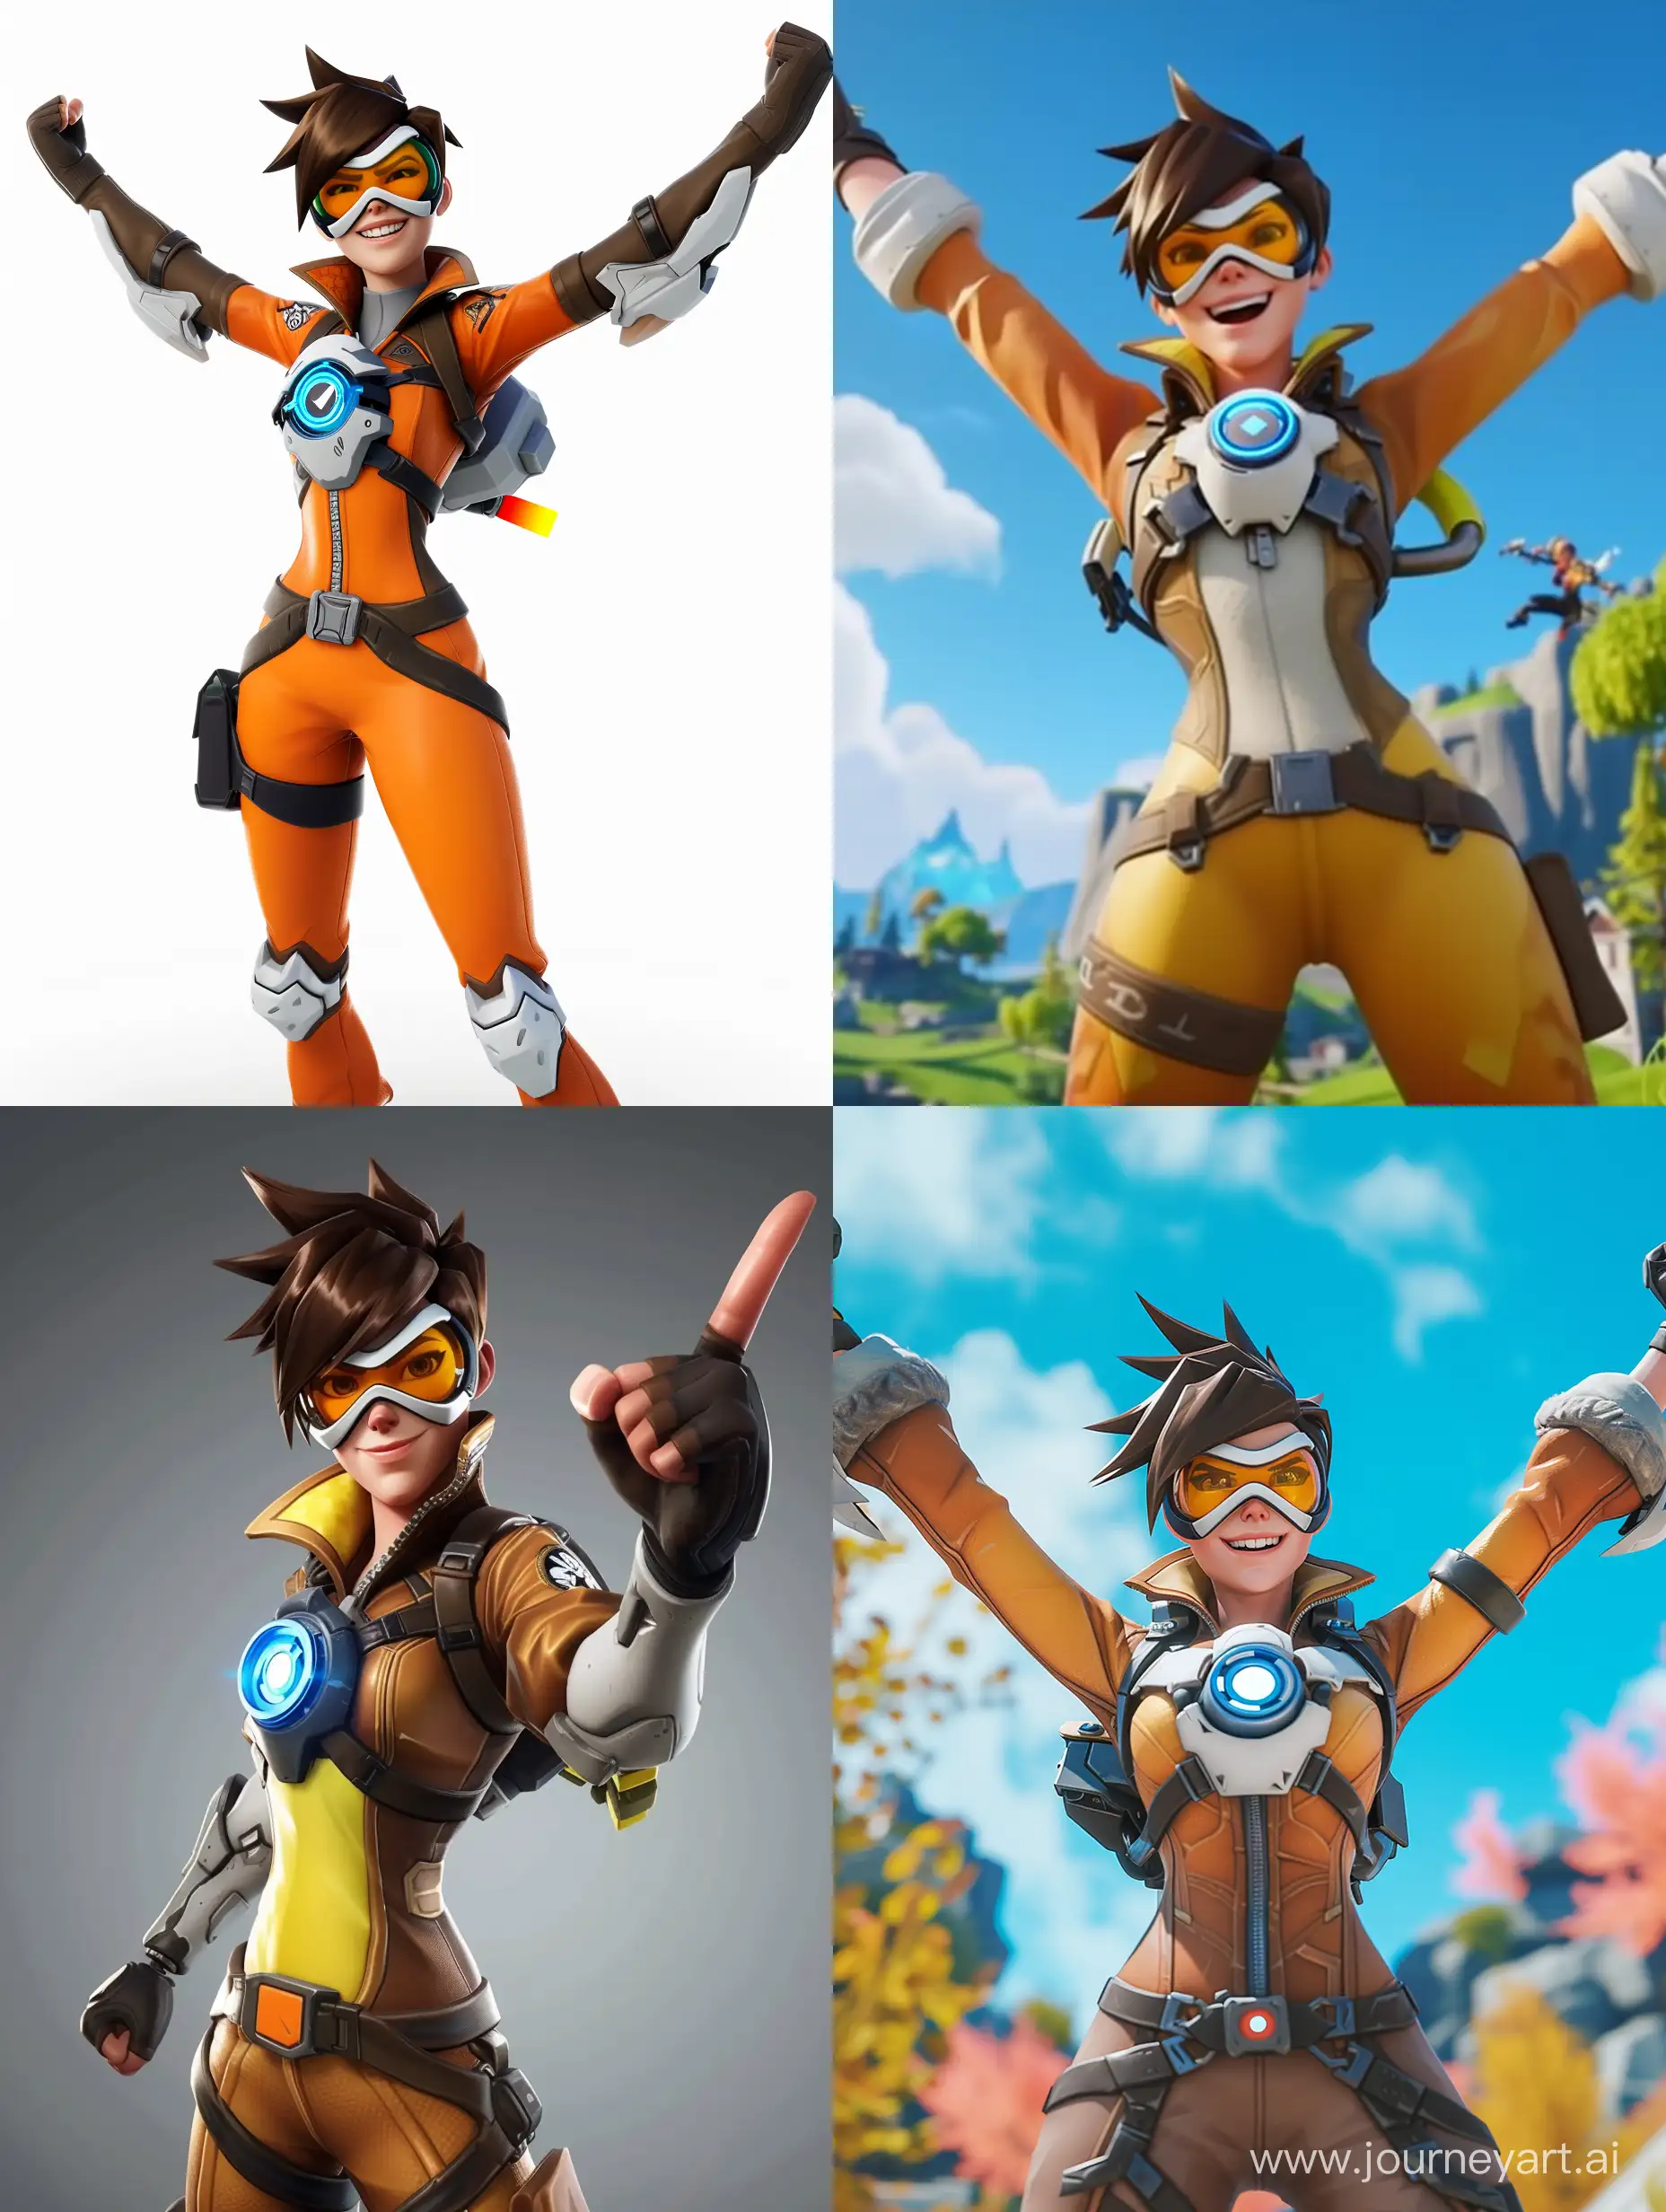 Tracer from Overwatch 1 as a Fortnite character, victory pose, joyful face